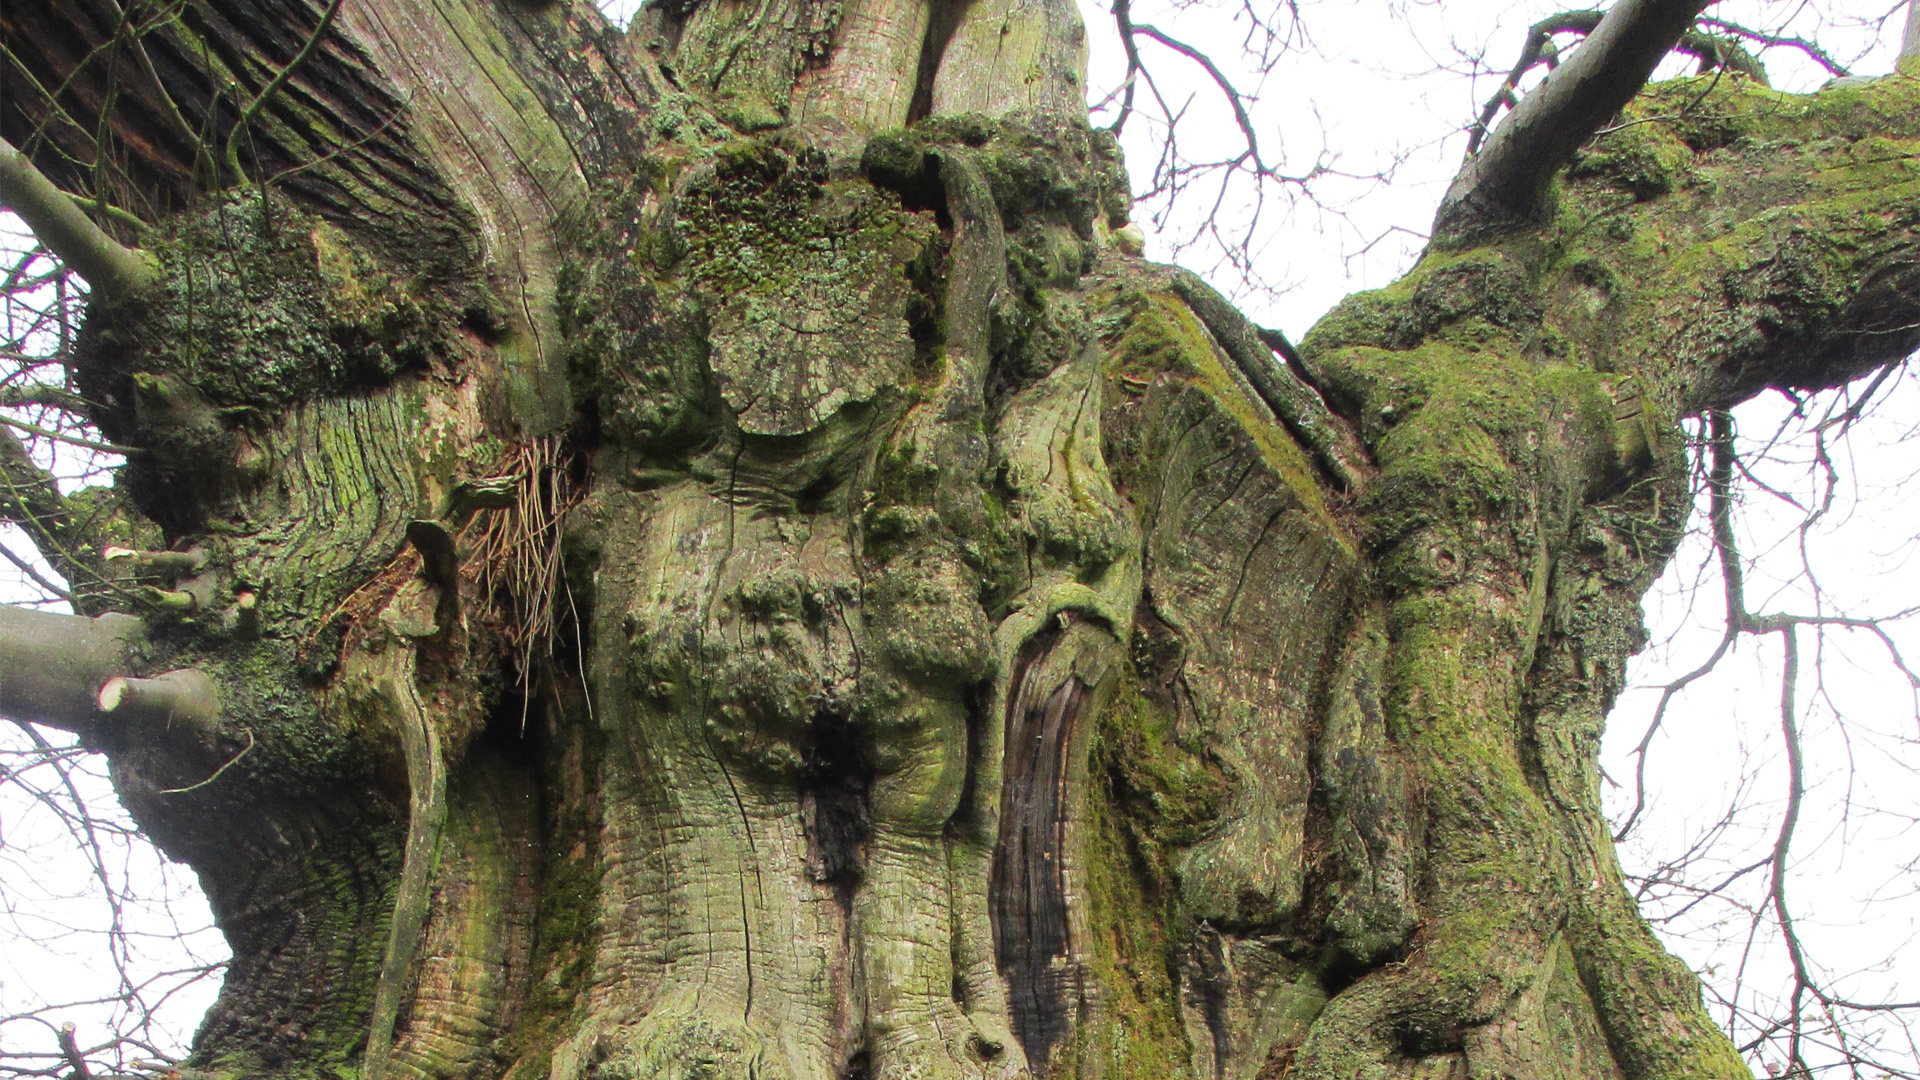 The Dunipace Sweet Chestnut Tree